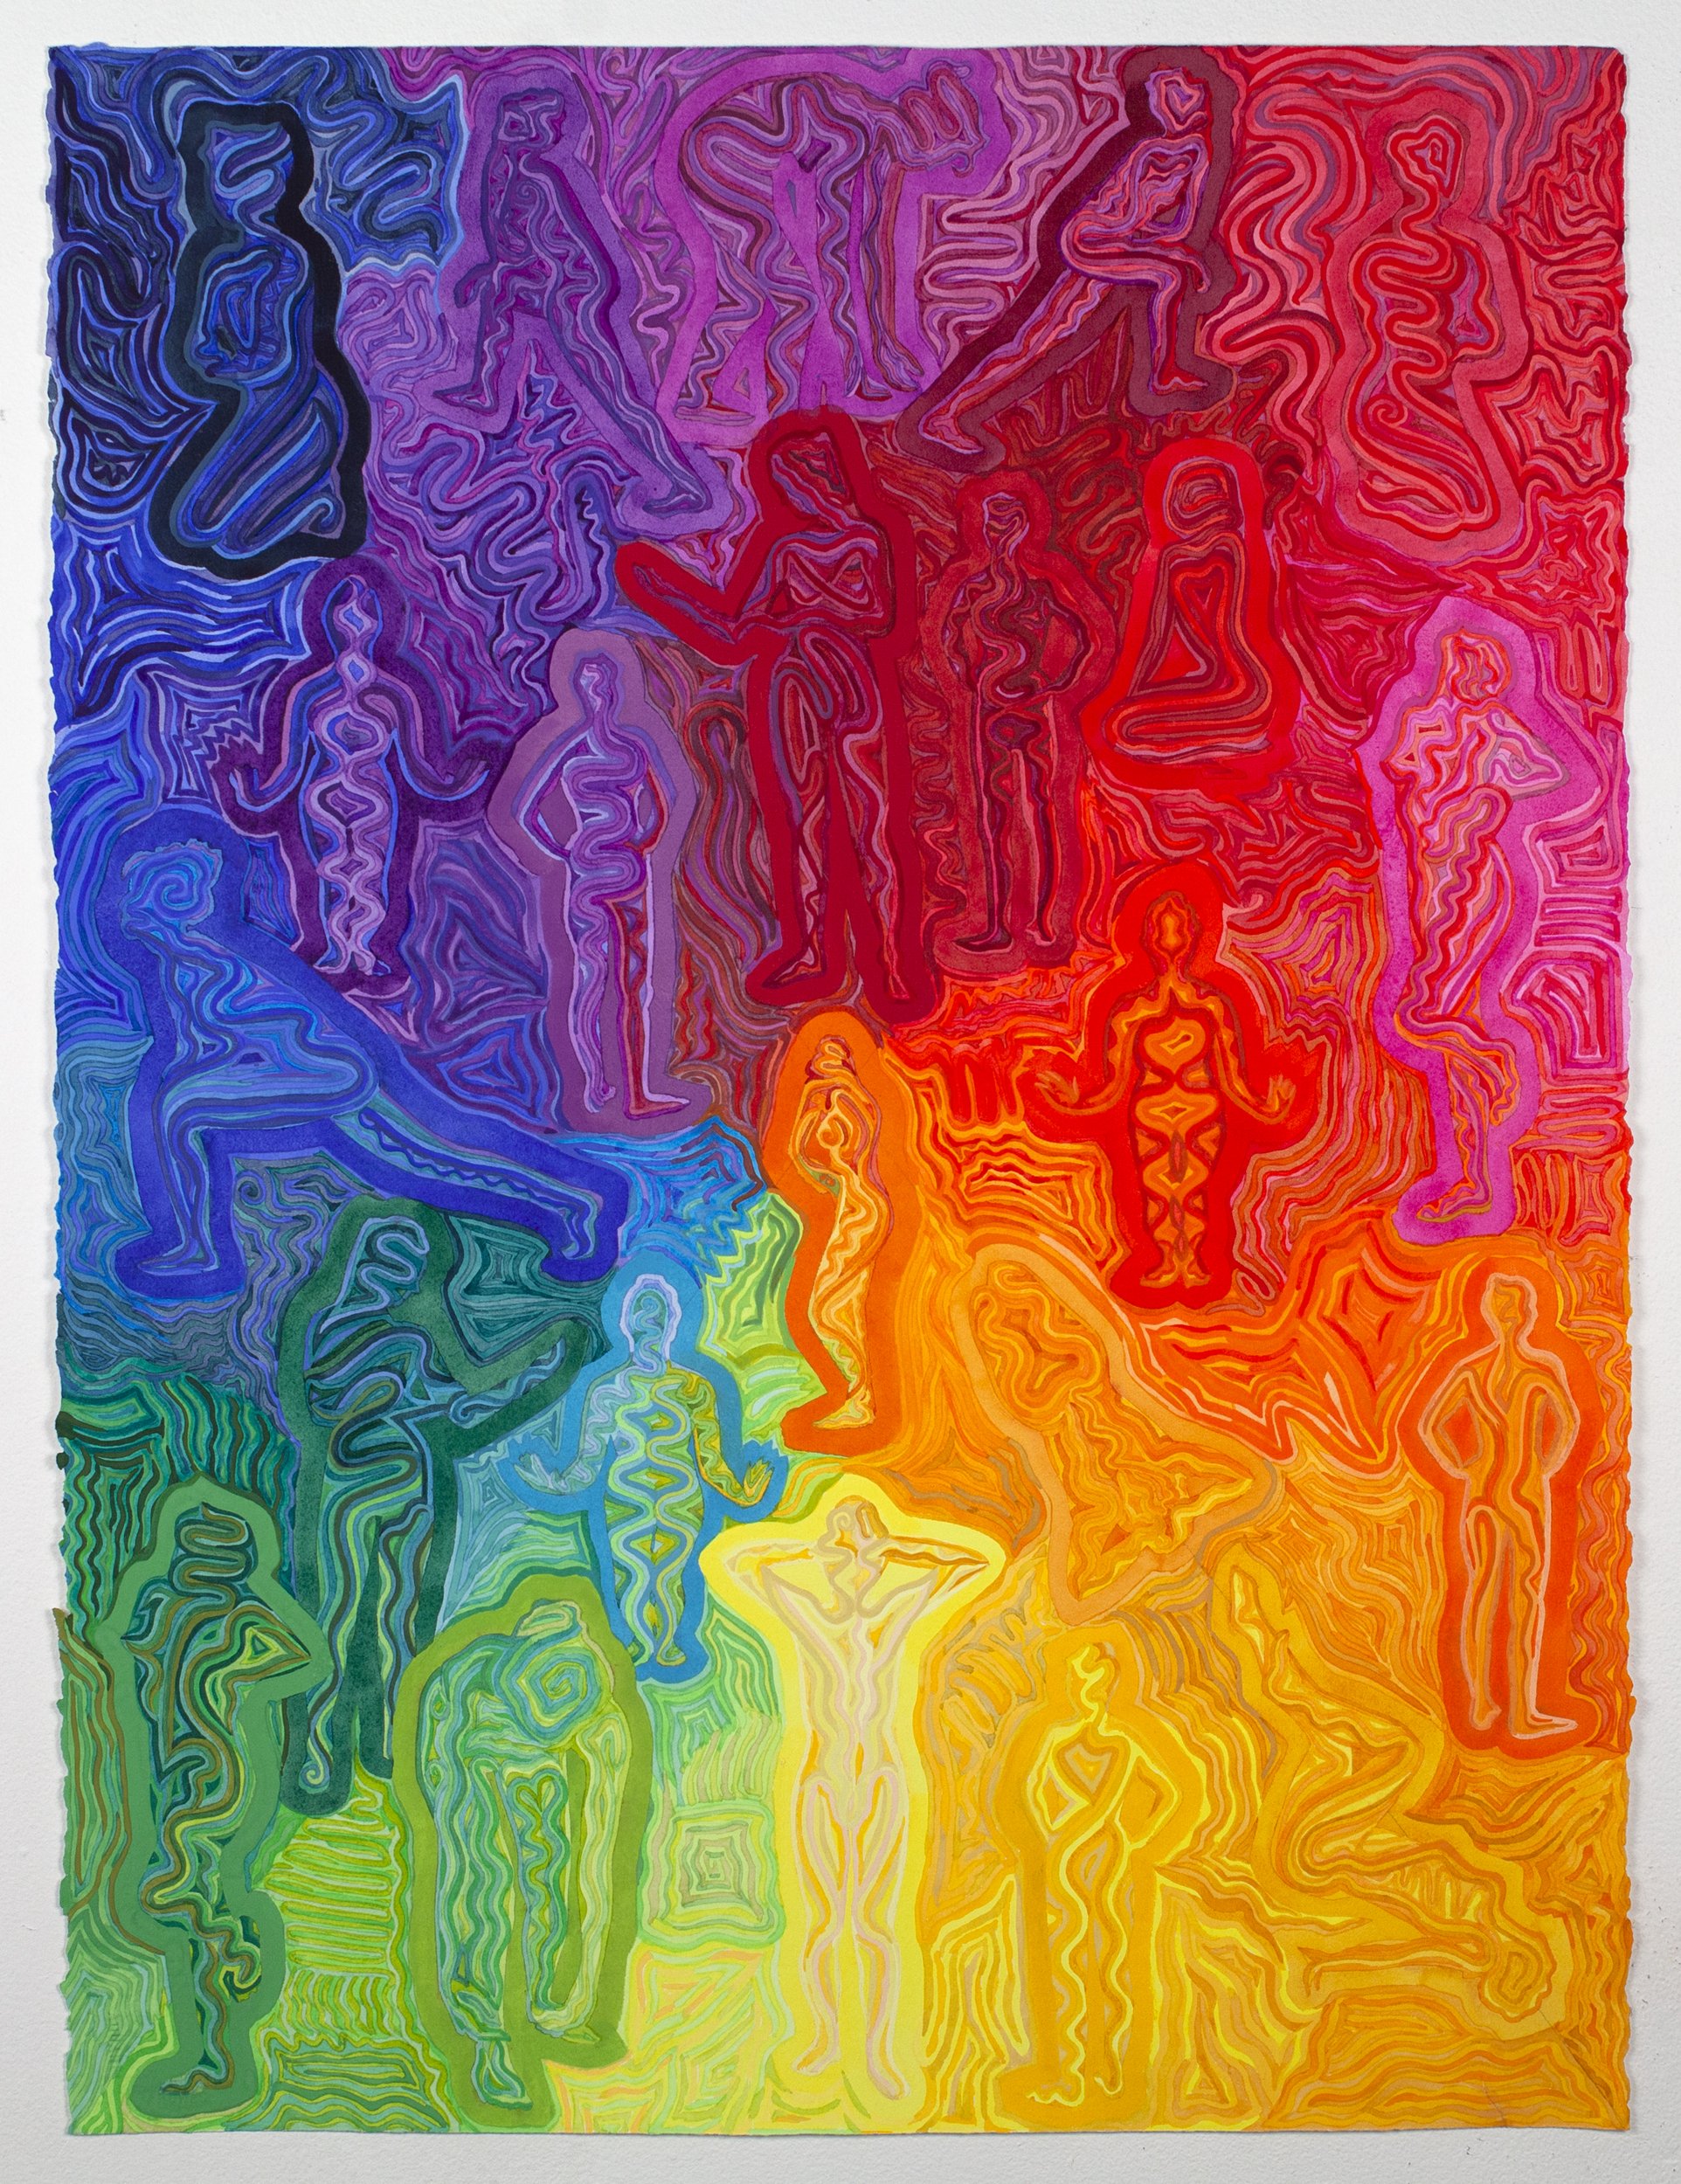 Rainbow of emotions / positions